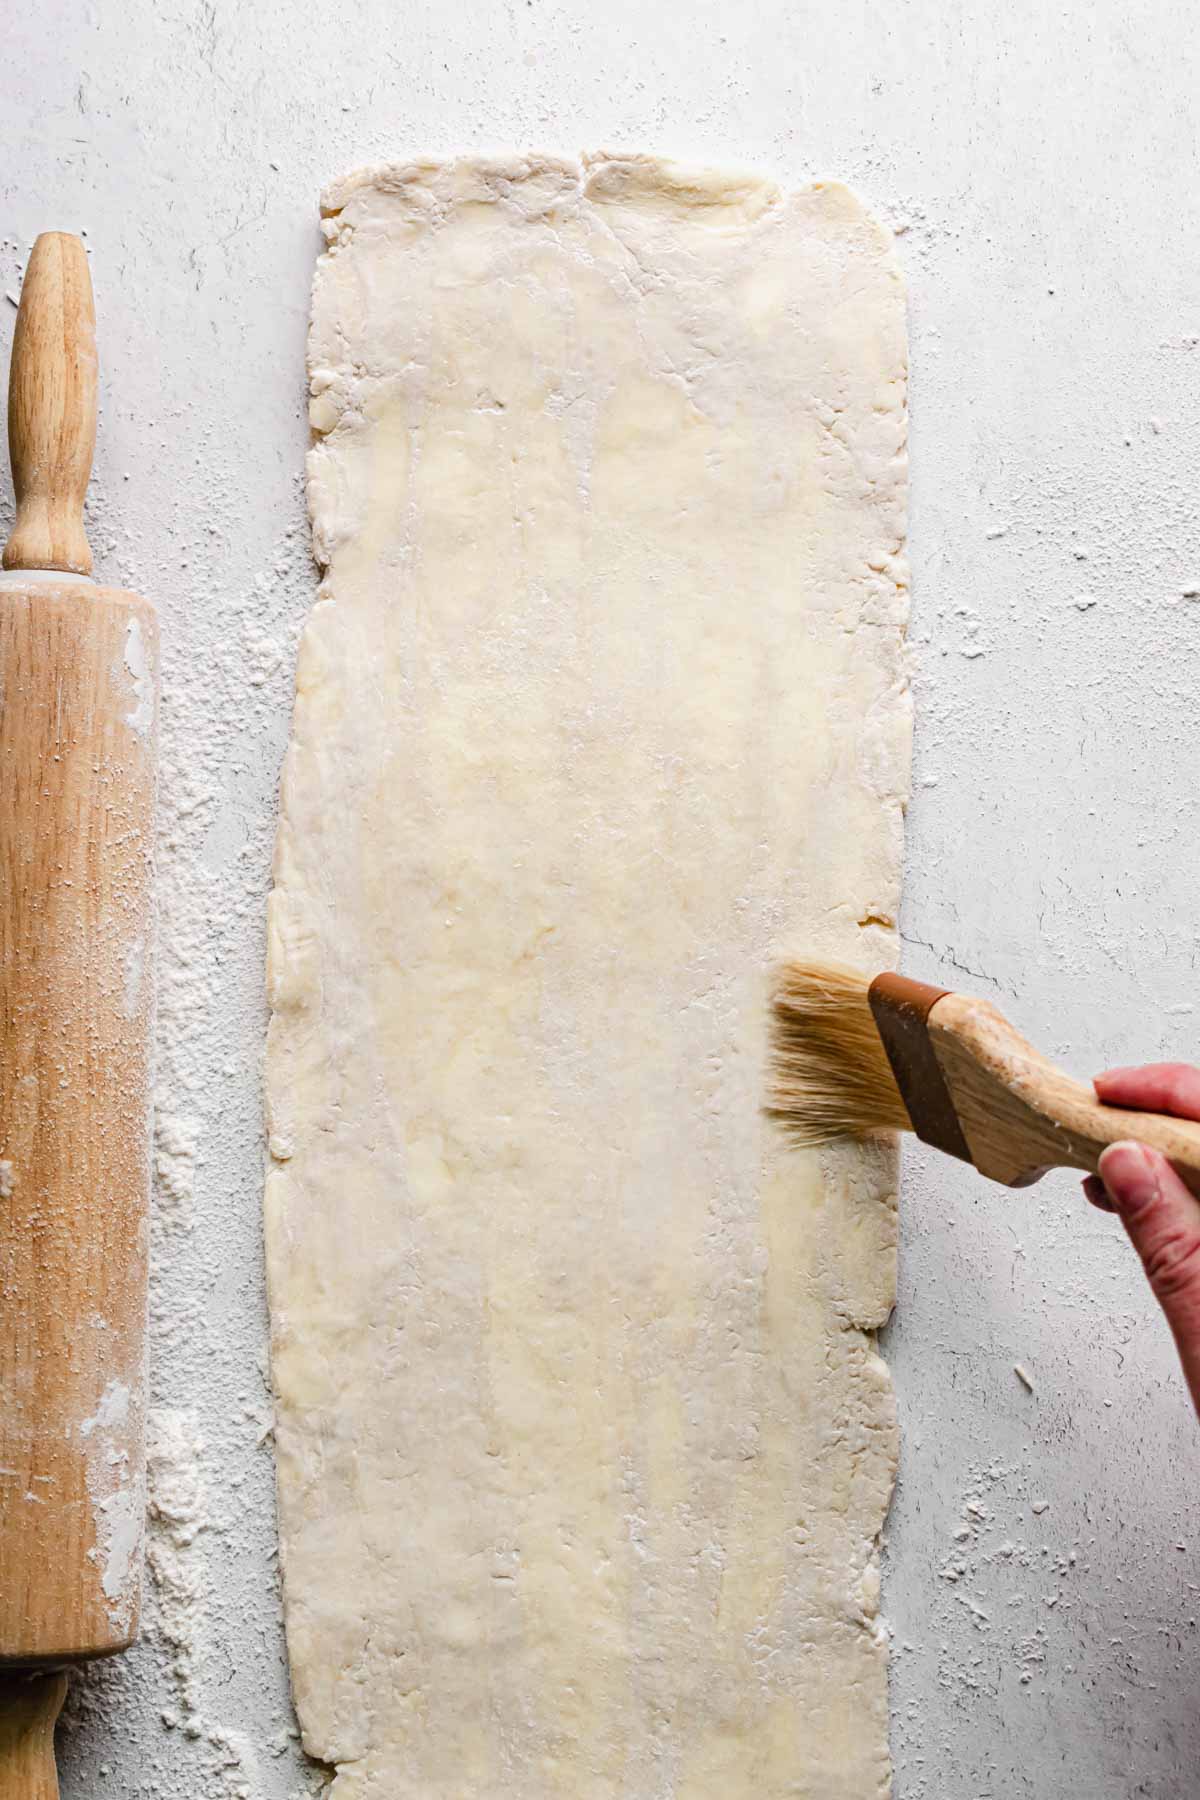 A pastry brush removes flour from the rolled out rough puff pastry.